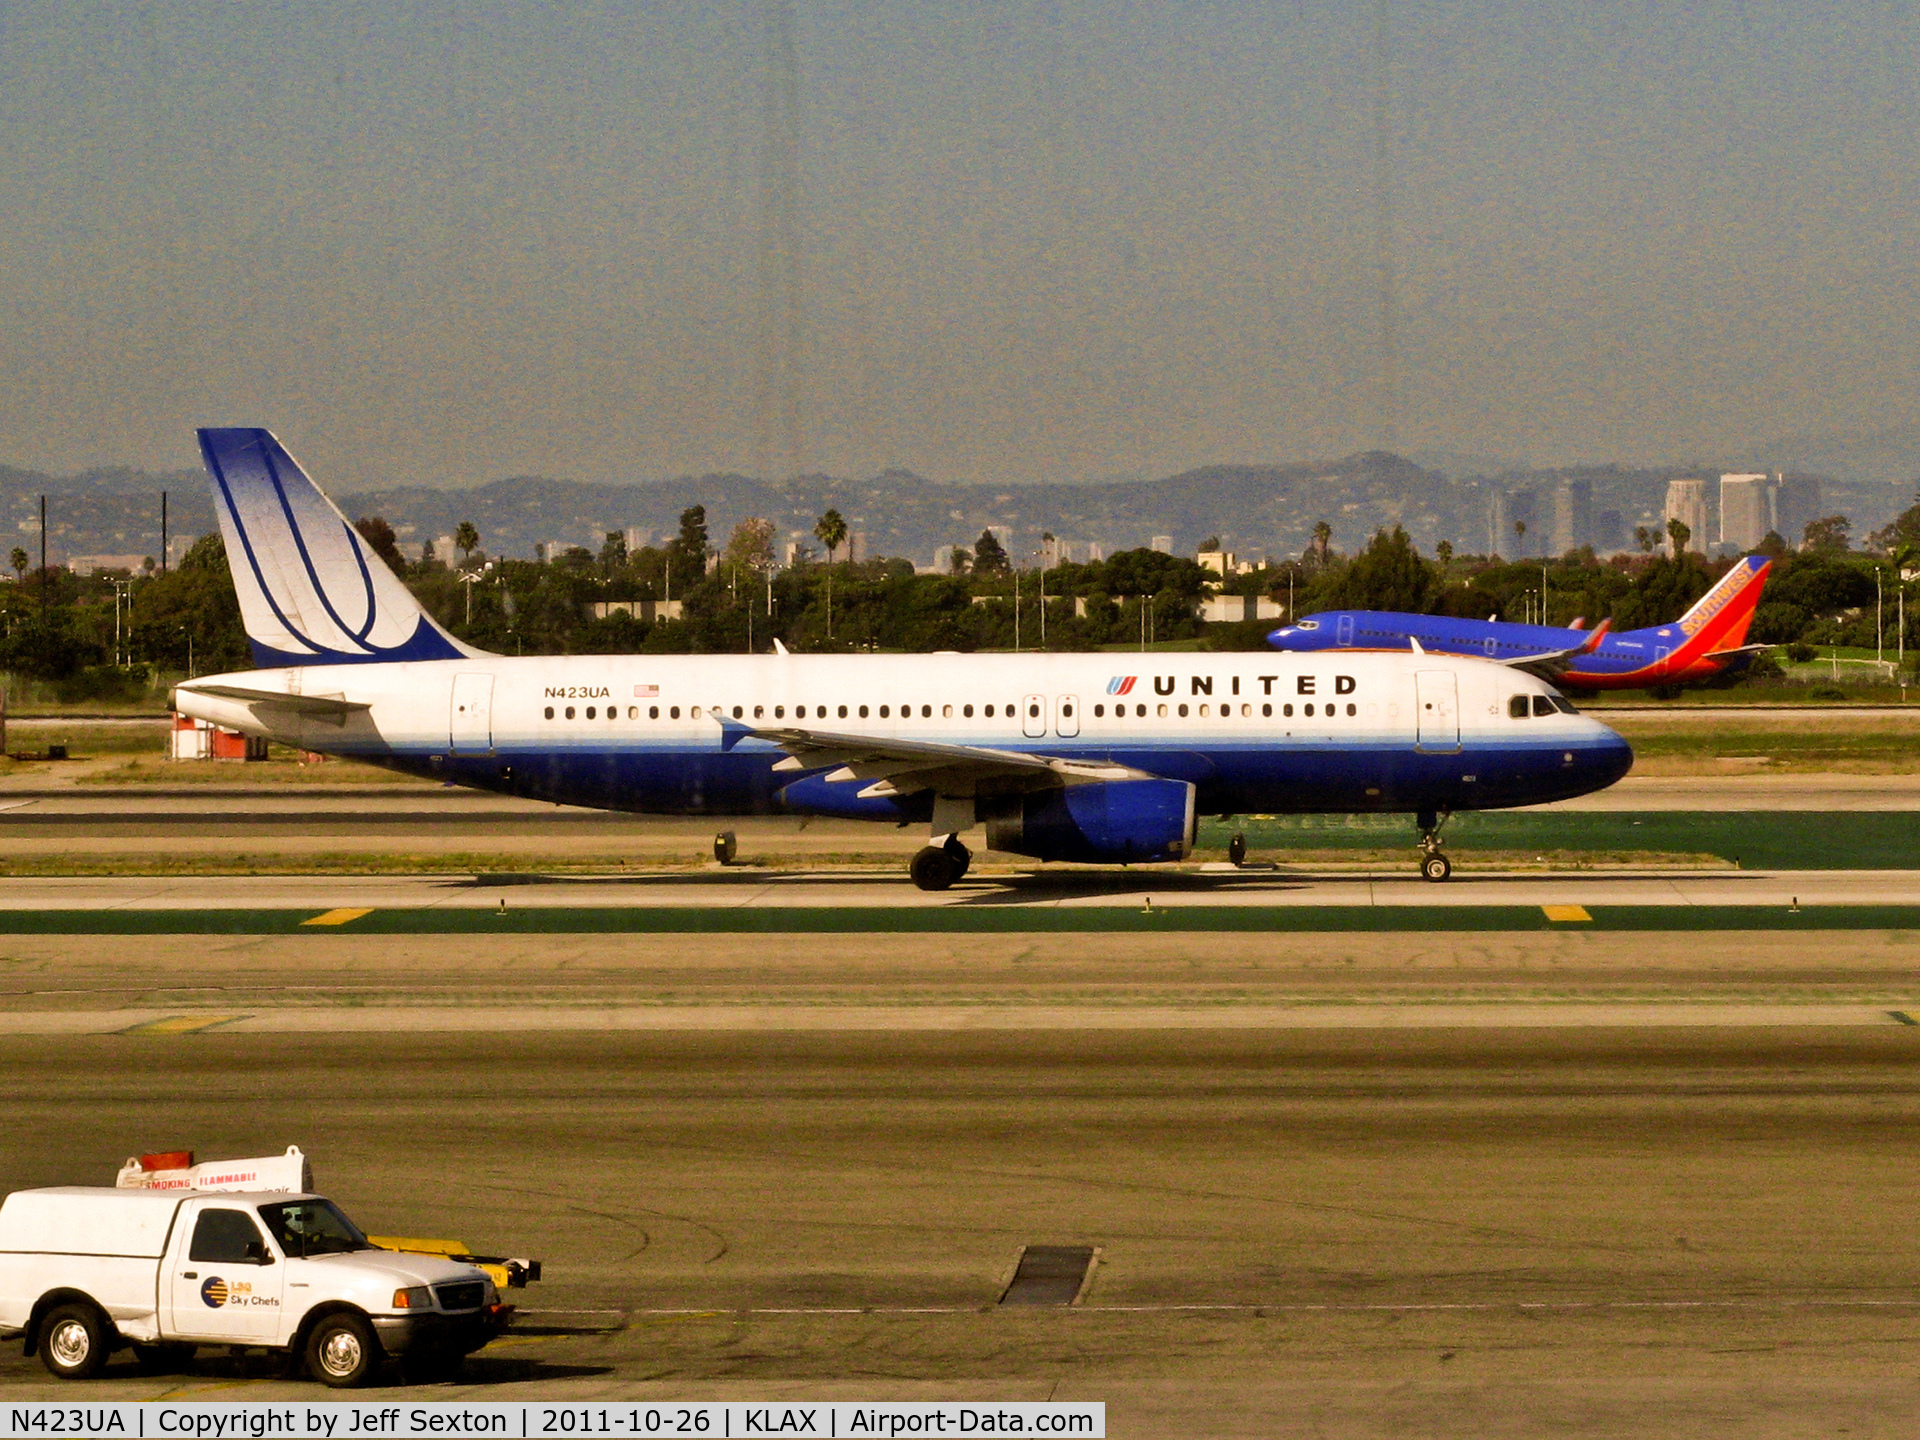 N423UA, 1995 Airbus A320-232 C/N 504, Taxiing at LAX